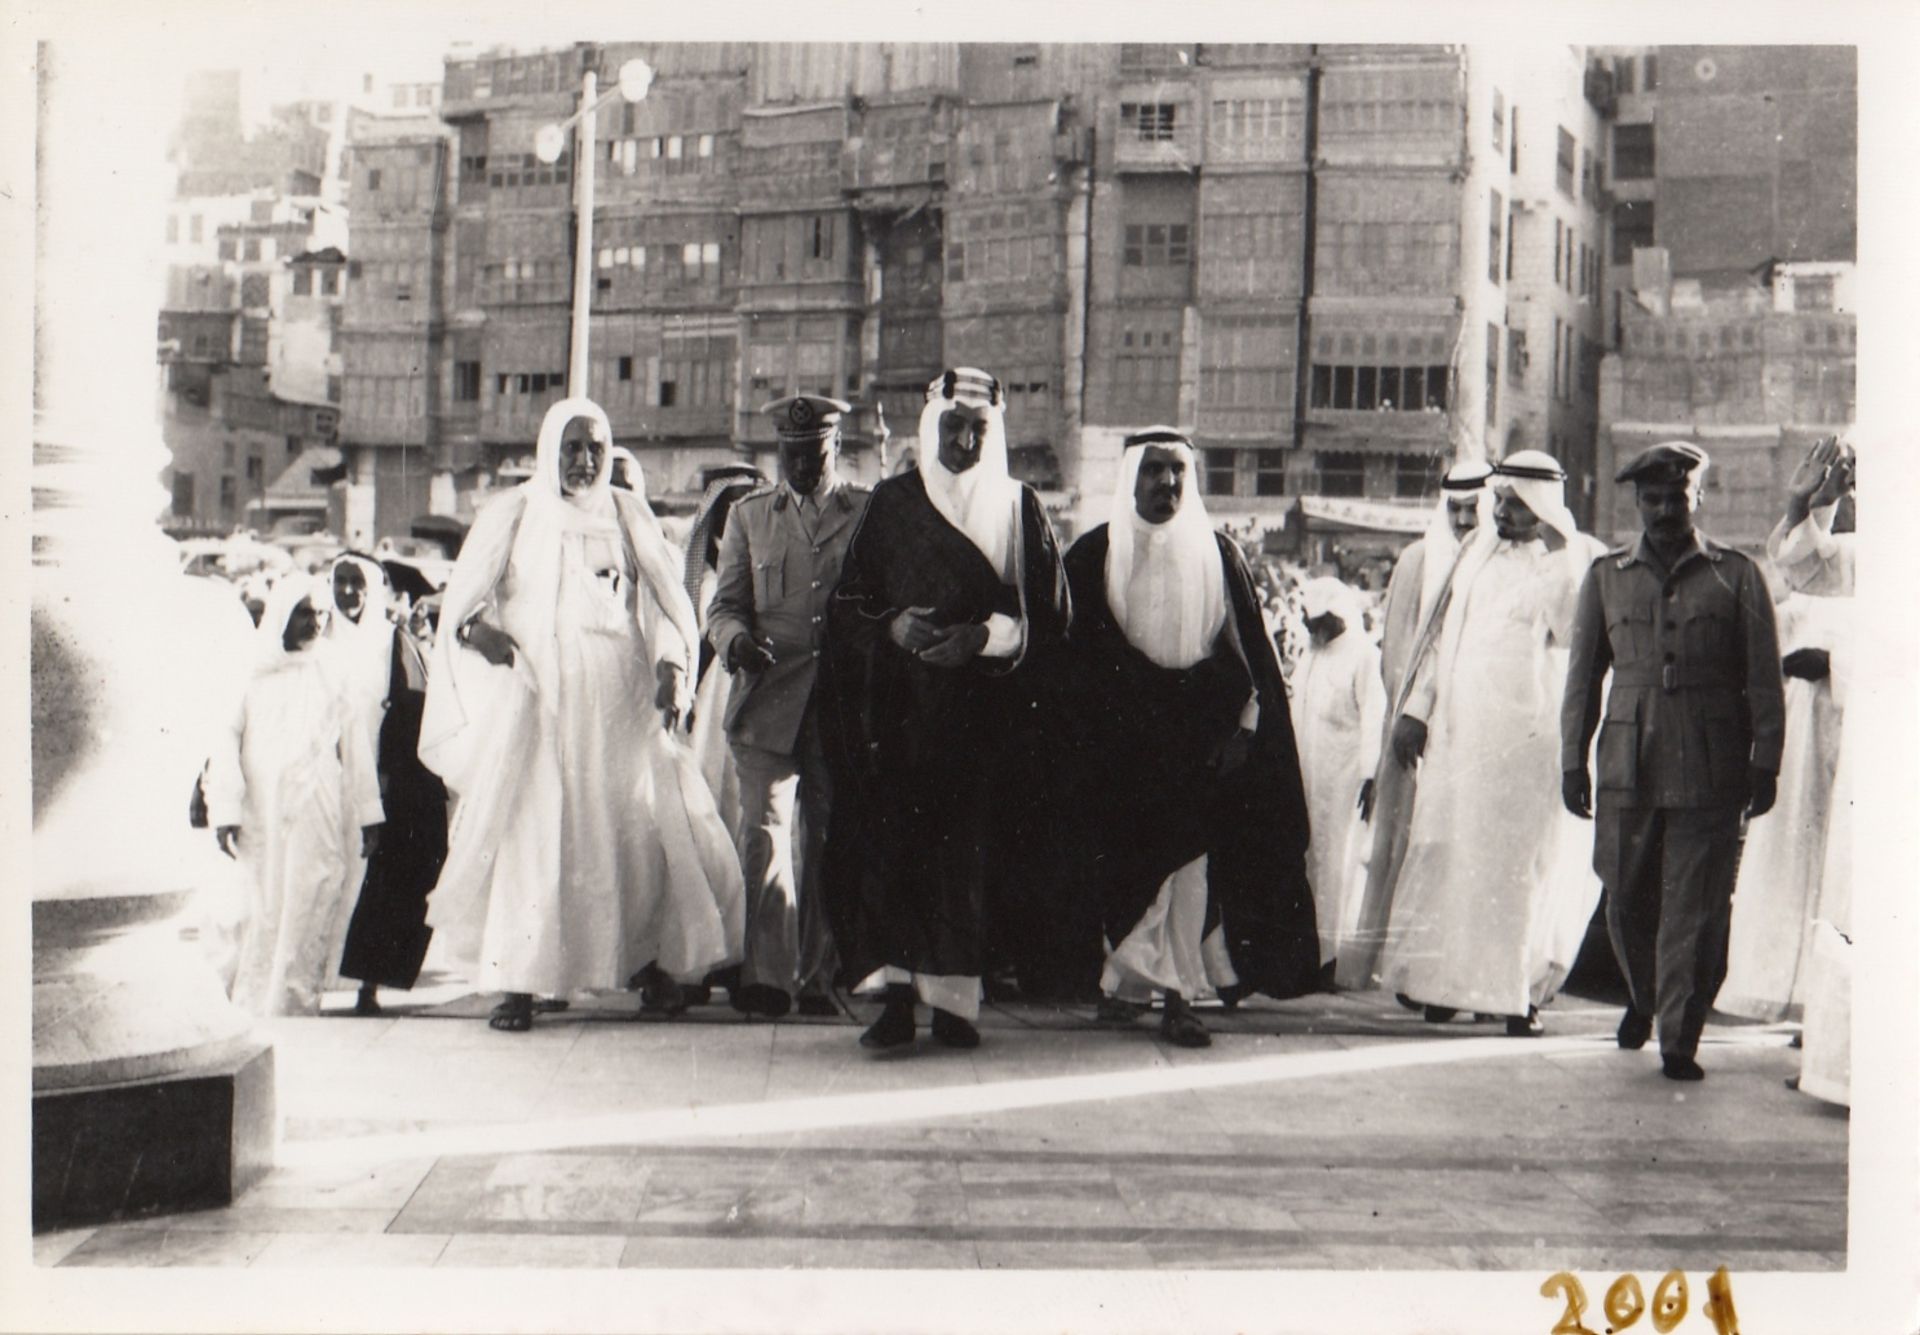 A COLLECTION OF PHOTOGRAPHS OF HIS MAJESTY KING FAISAL BIN ABDUL AZIZ VISITING THE GRAND MOSQUES OF - Image 20 of 24